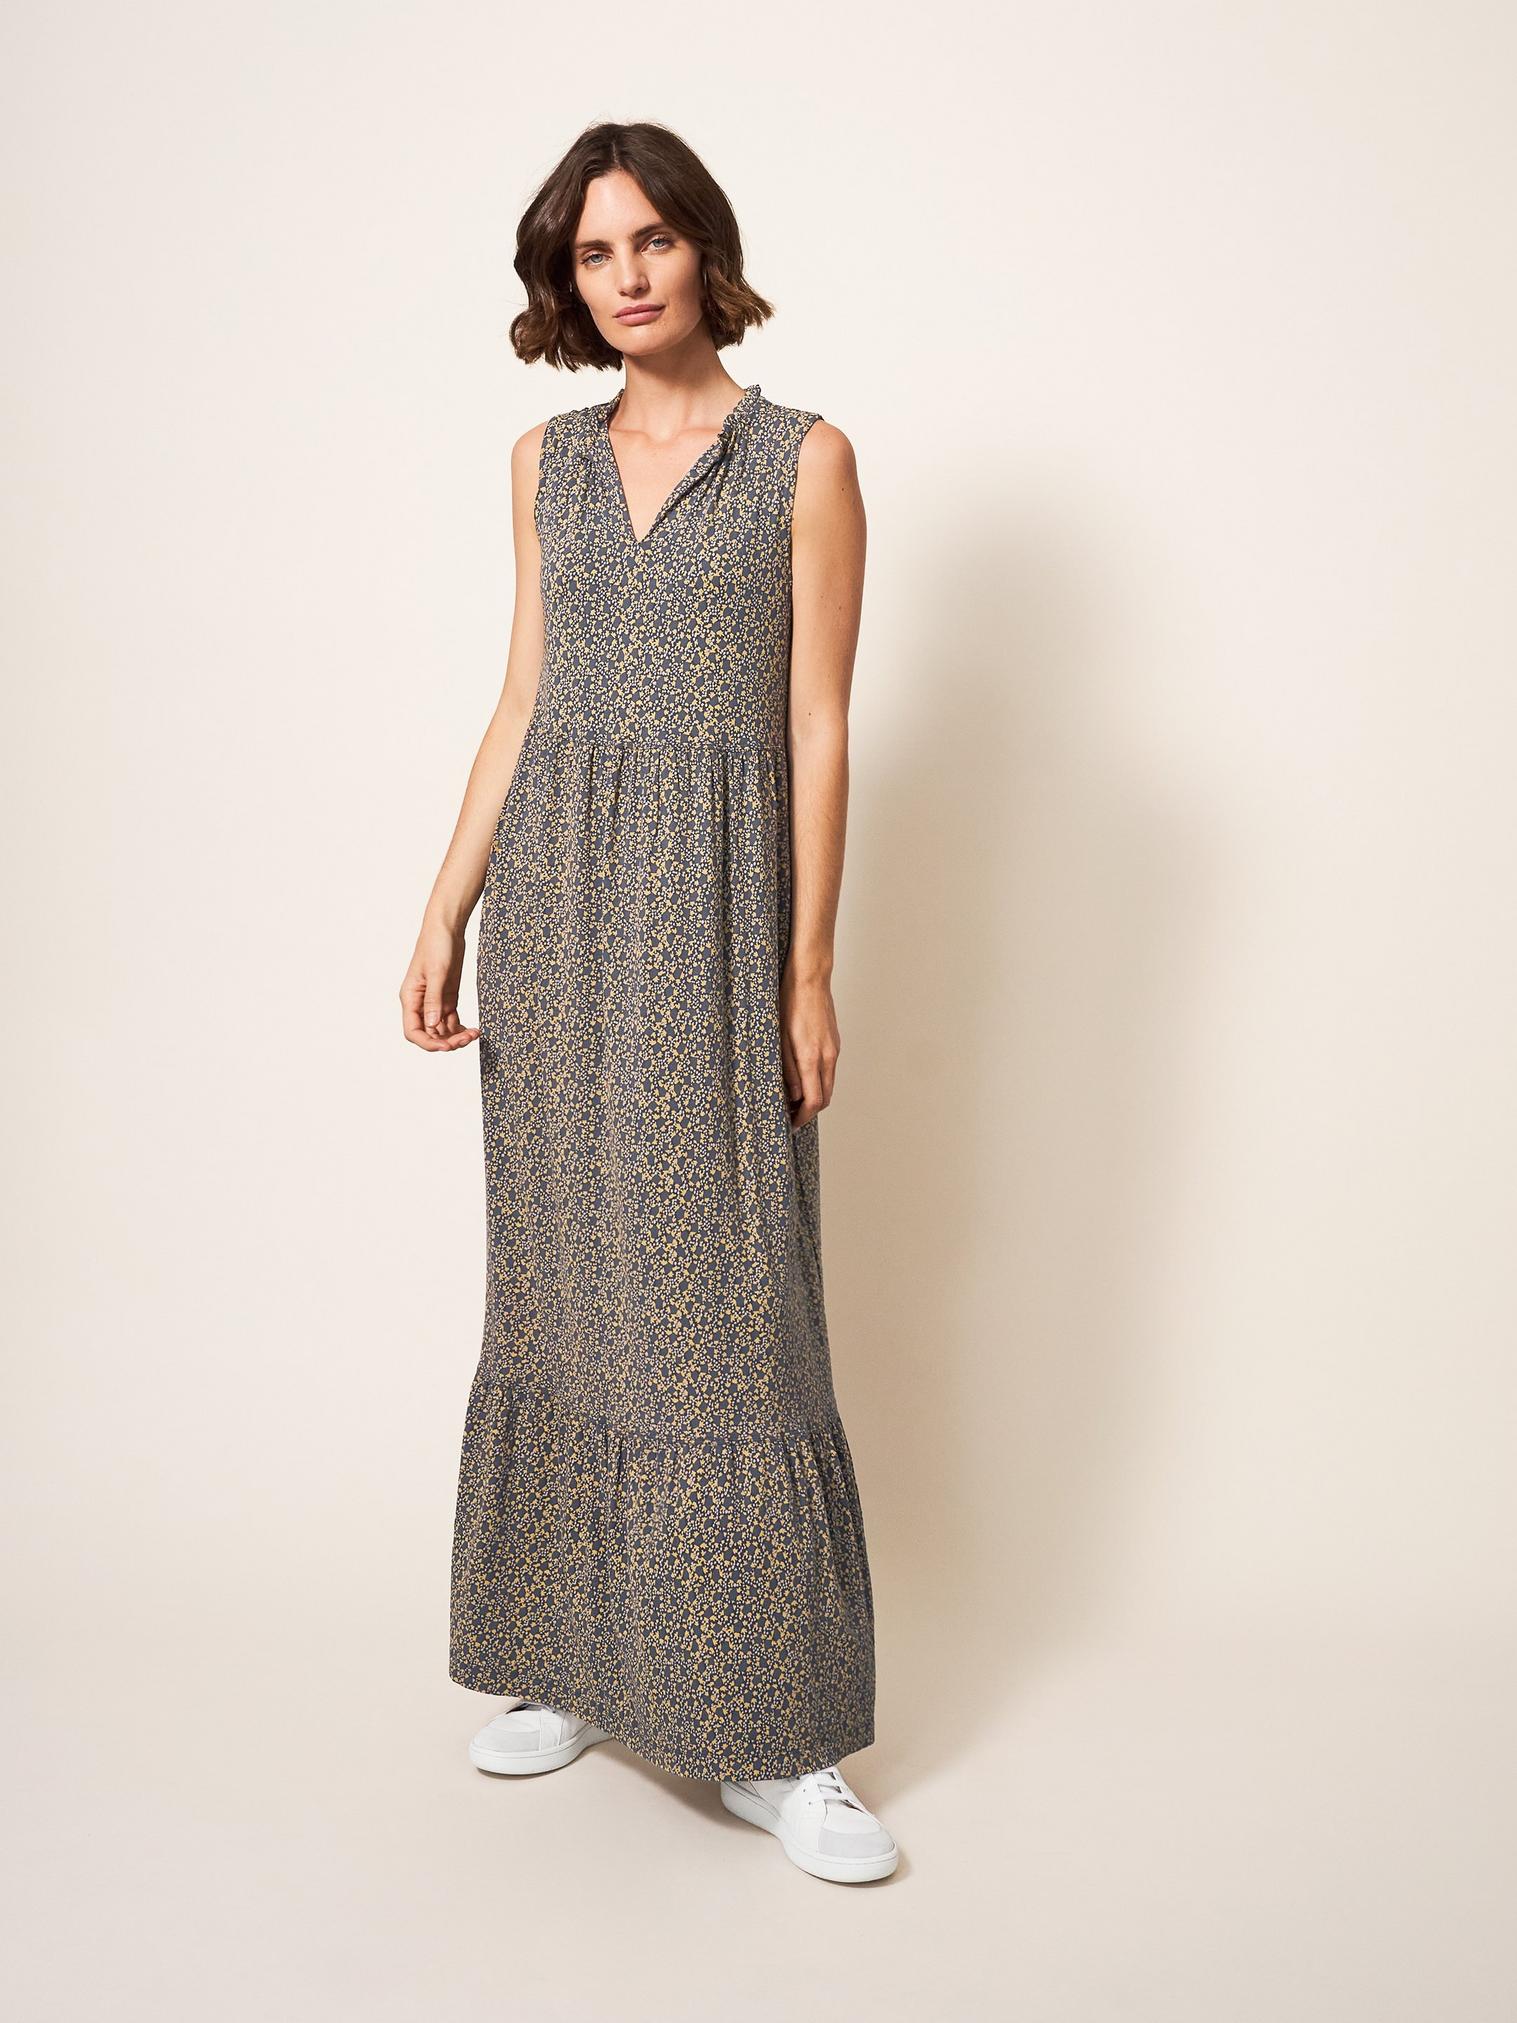 Sonia Jersey Maxi Dress in GREY MLT - LIFESTYLE